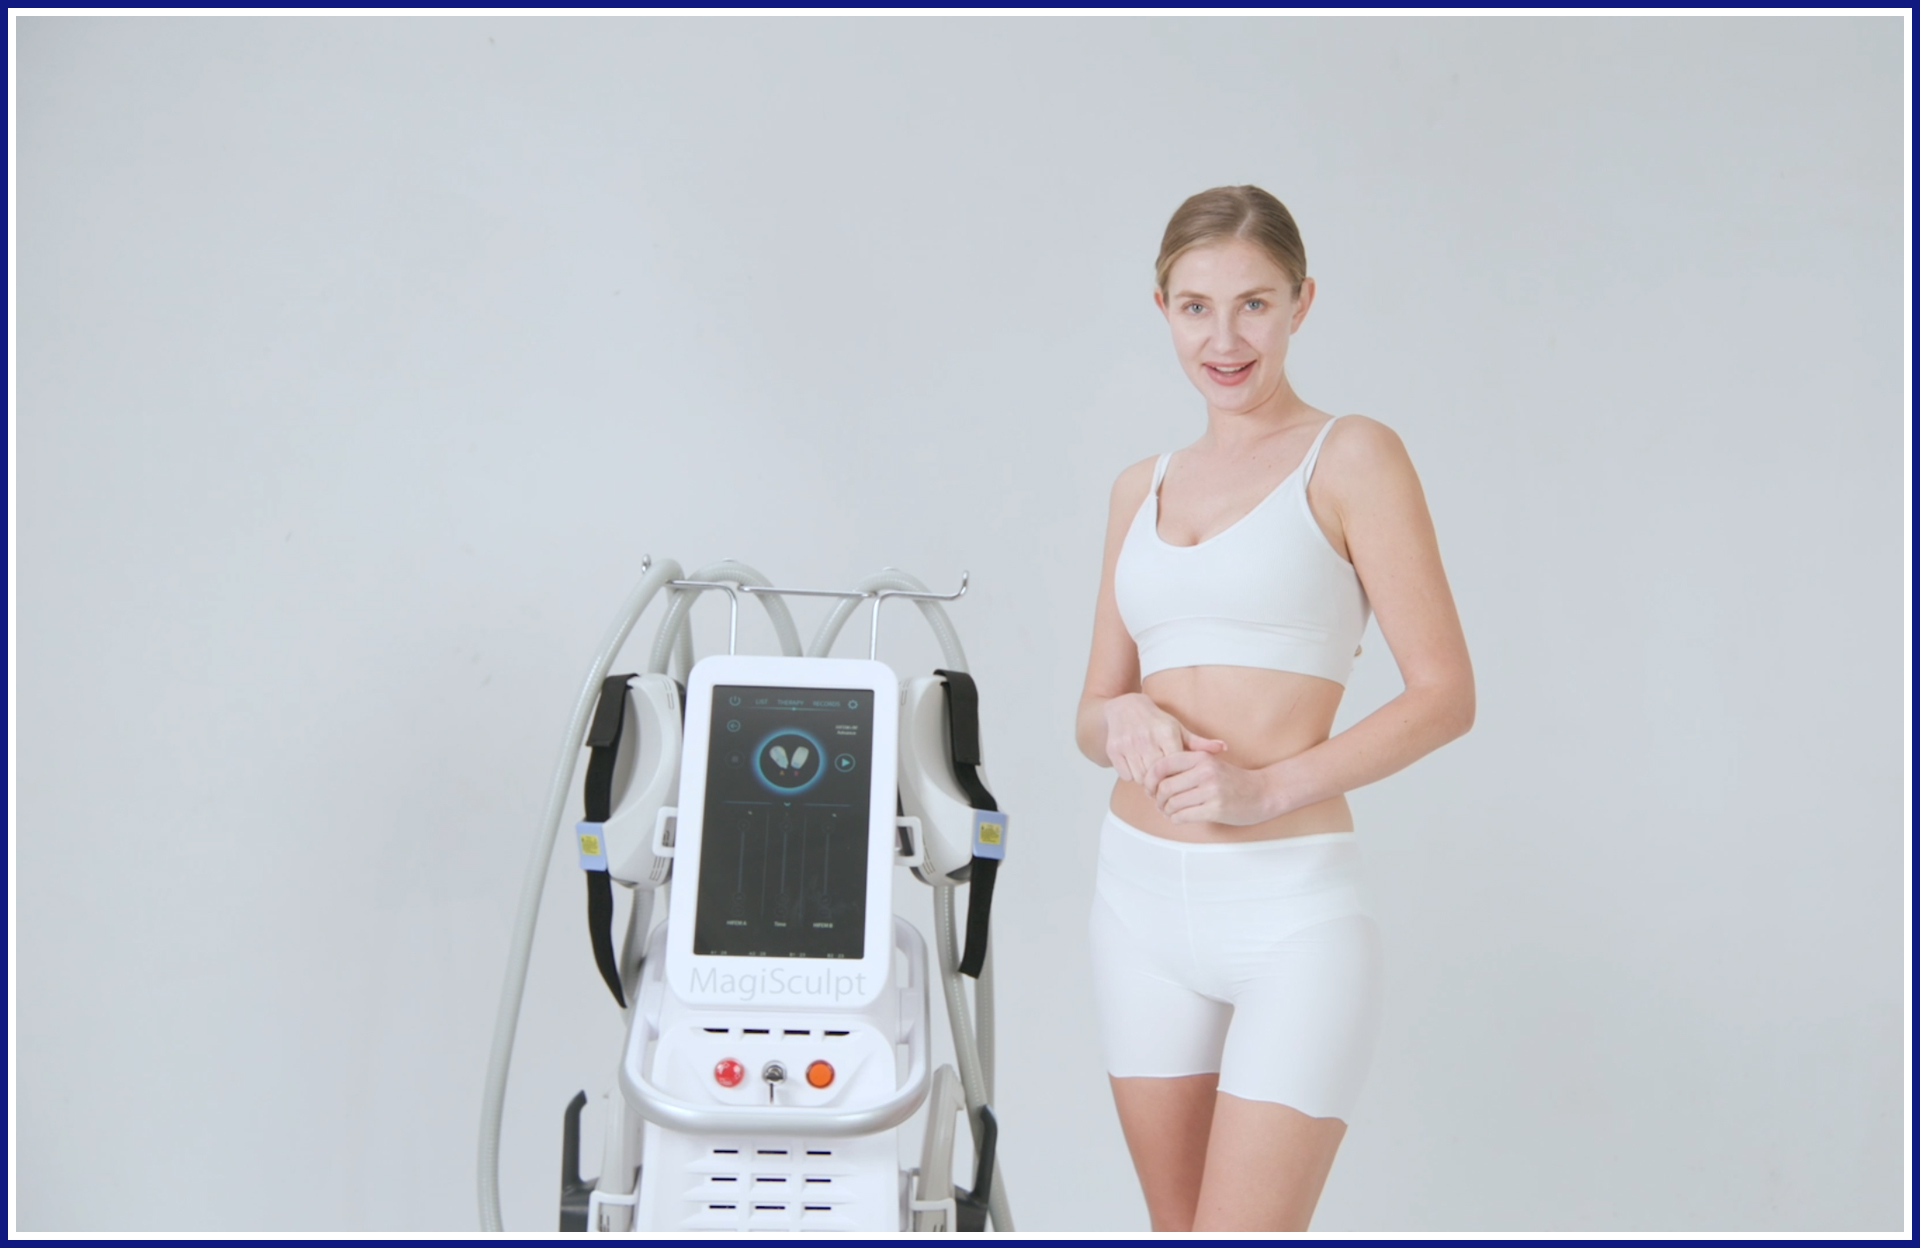 MagiSculpt Unveiled! Experience the Ultimate 4-in-1 EMS Body Sculpting Marvel by SEA HEART GROUP!